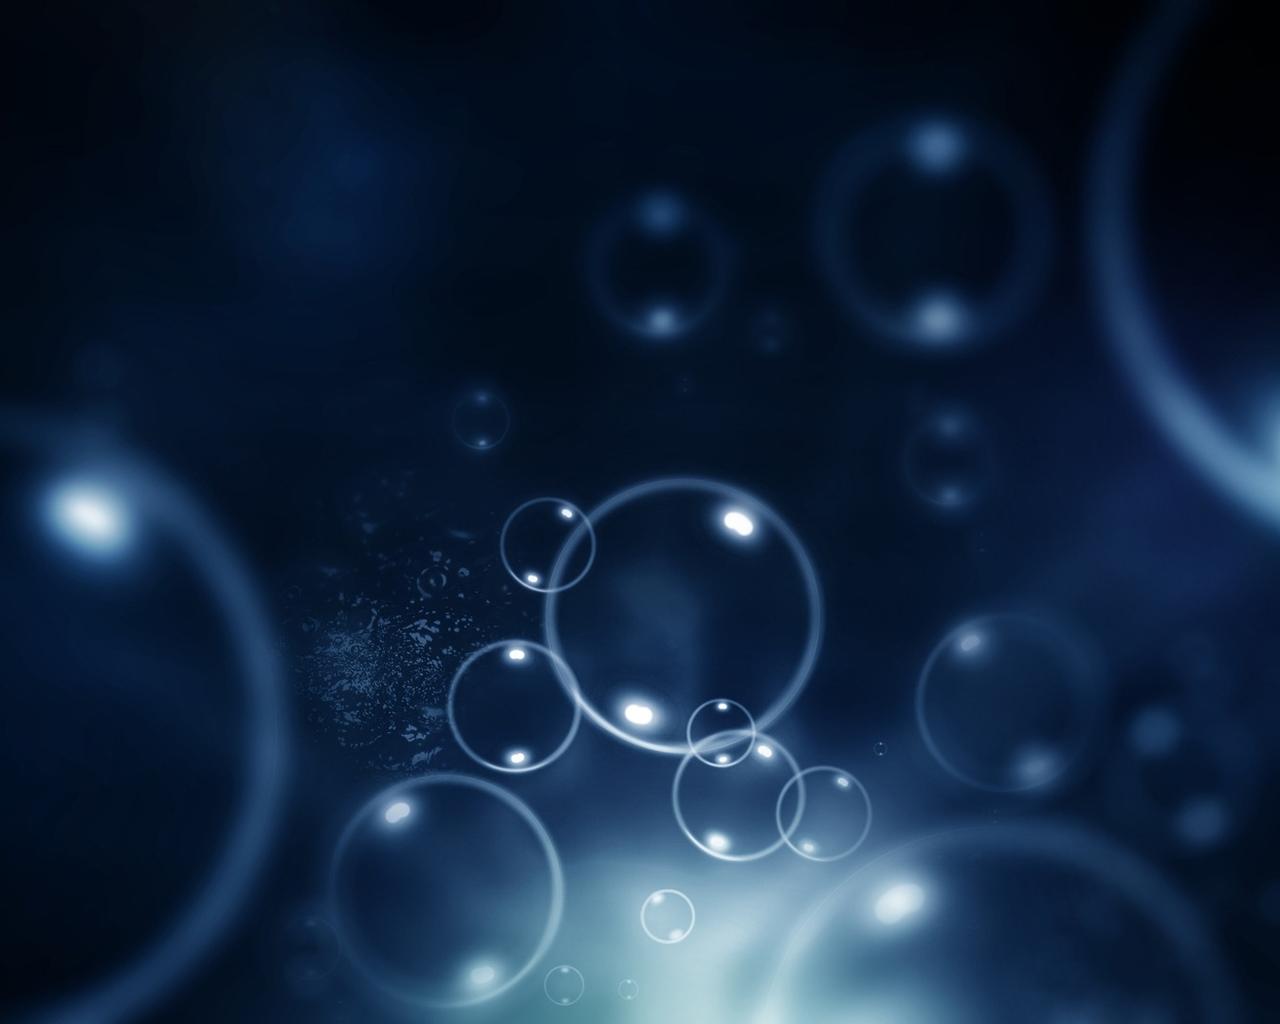 Water bubbles - Blue abstract wallpaper